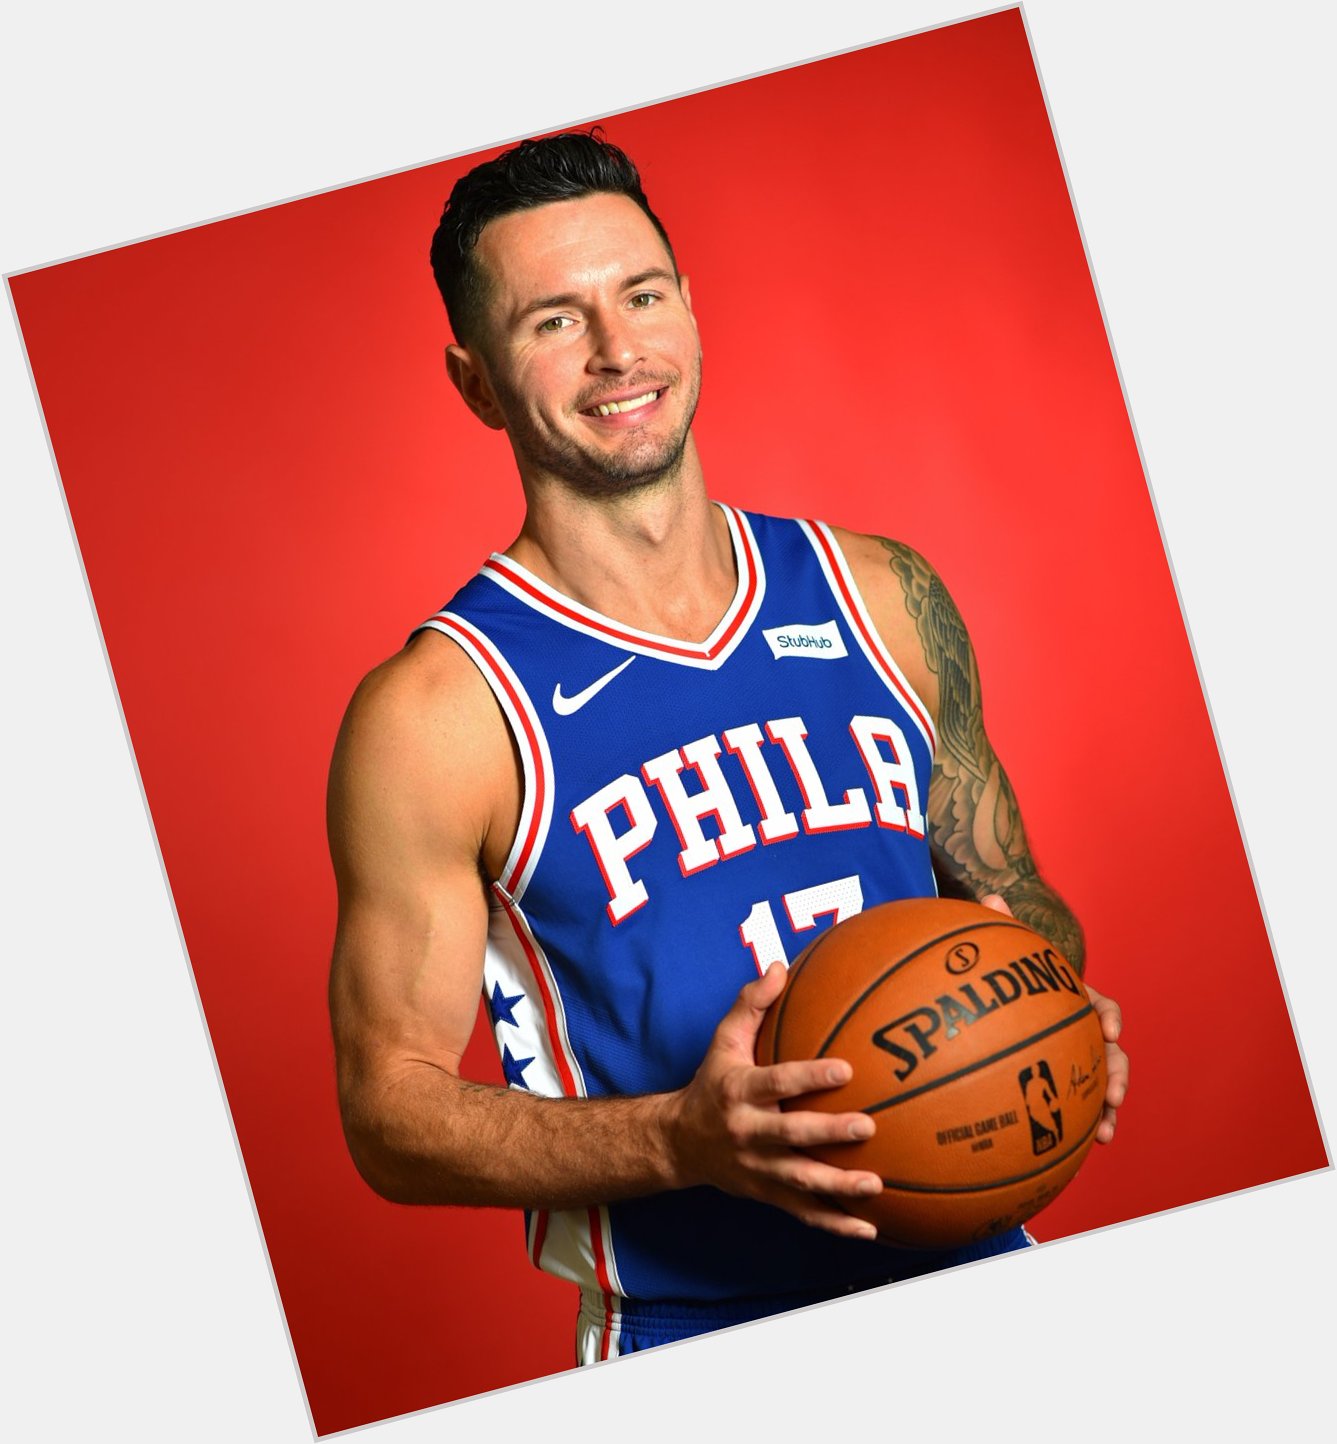 Join us in wishing JJ Redick of the sixers a HAPPY 35th BIRTHDAY!   